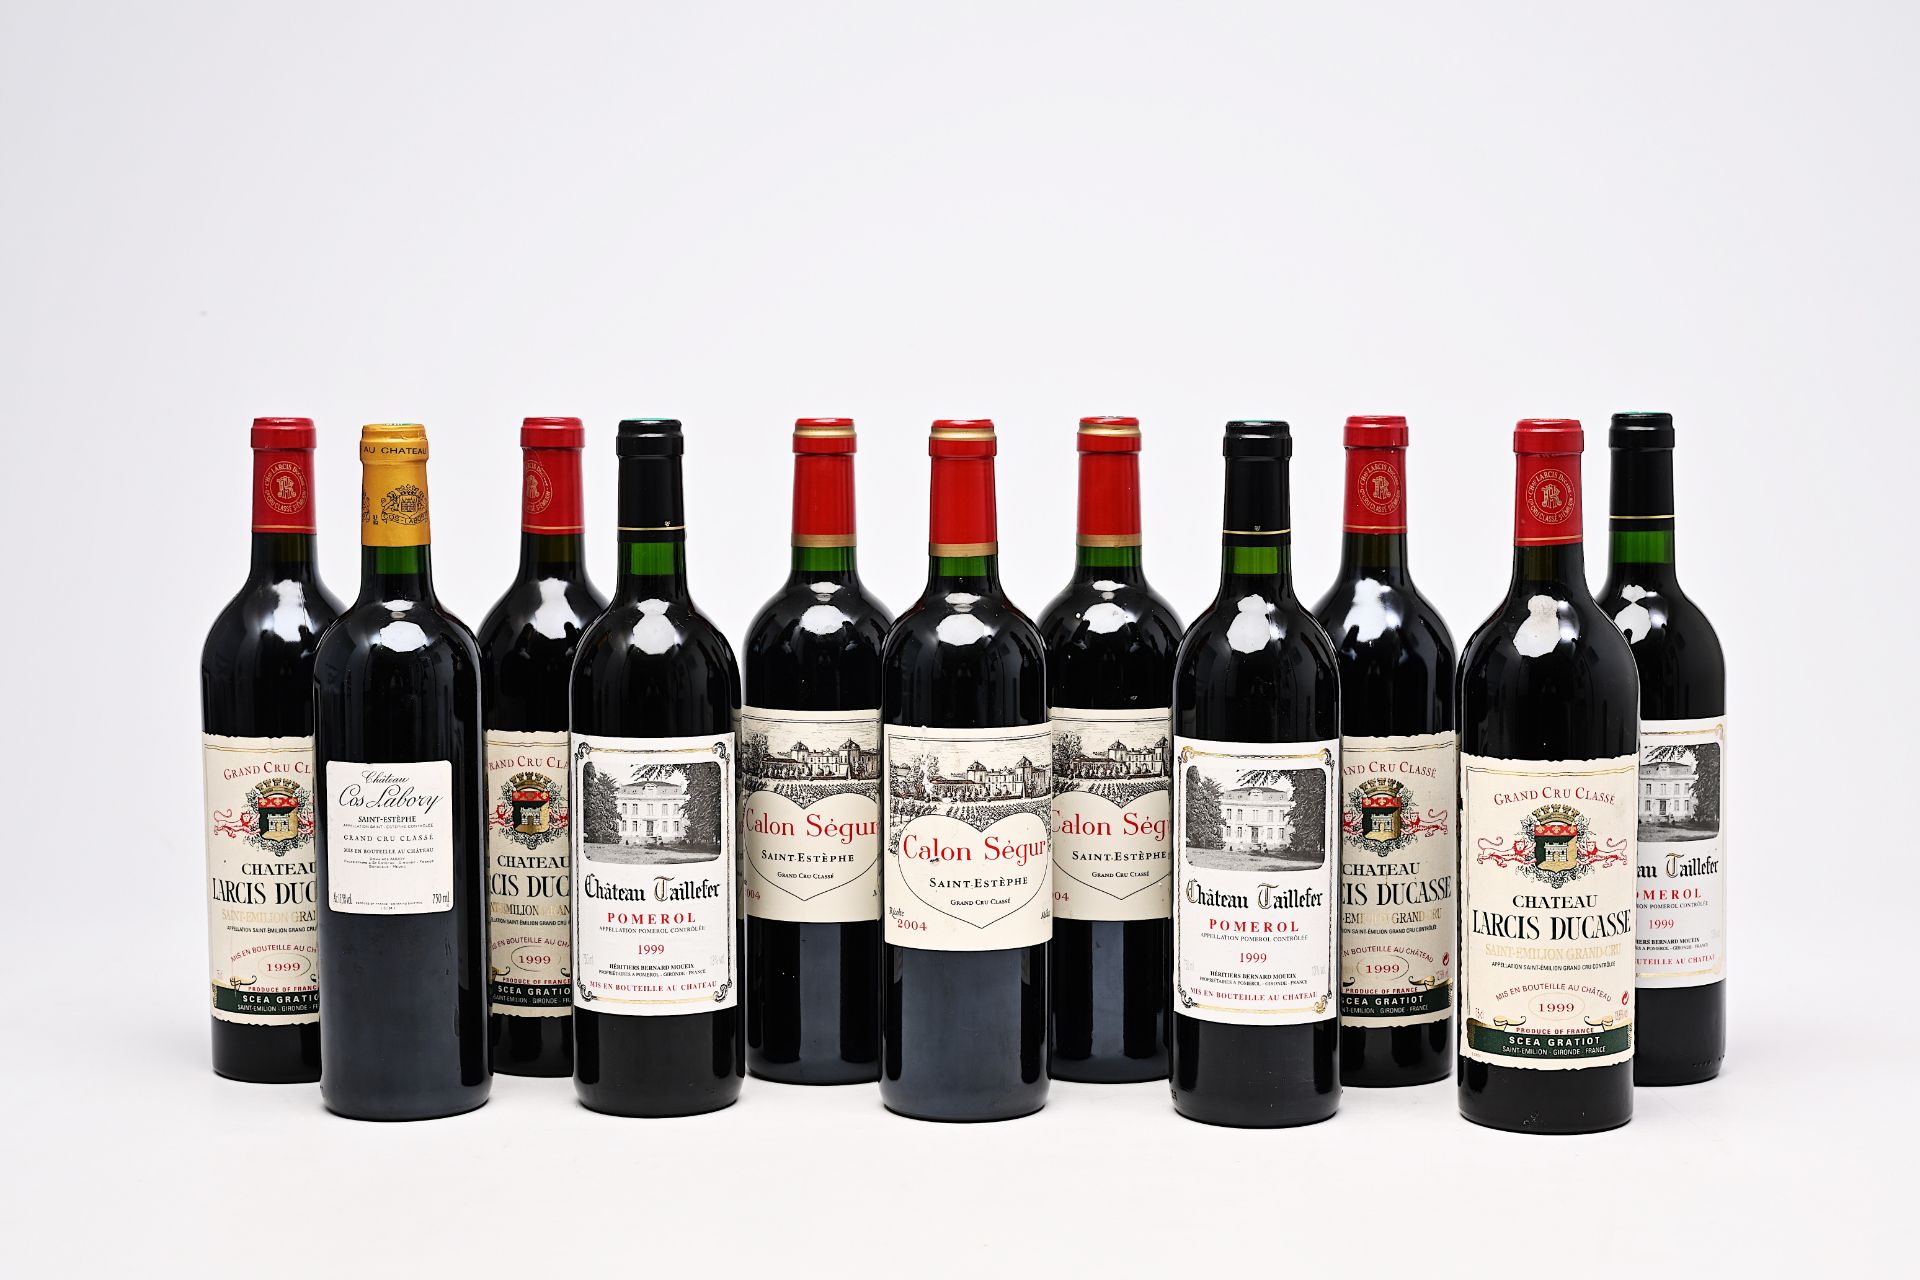 Three bottles of Chateau Taillefer Pomerol, four bottles of Chateau Larcis Ducasse Saint-Emilion and